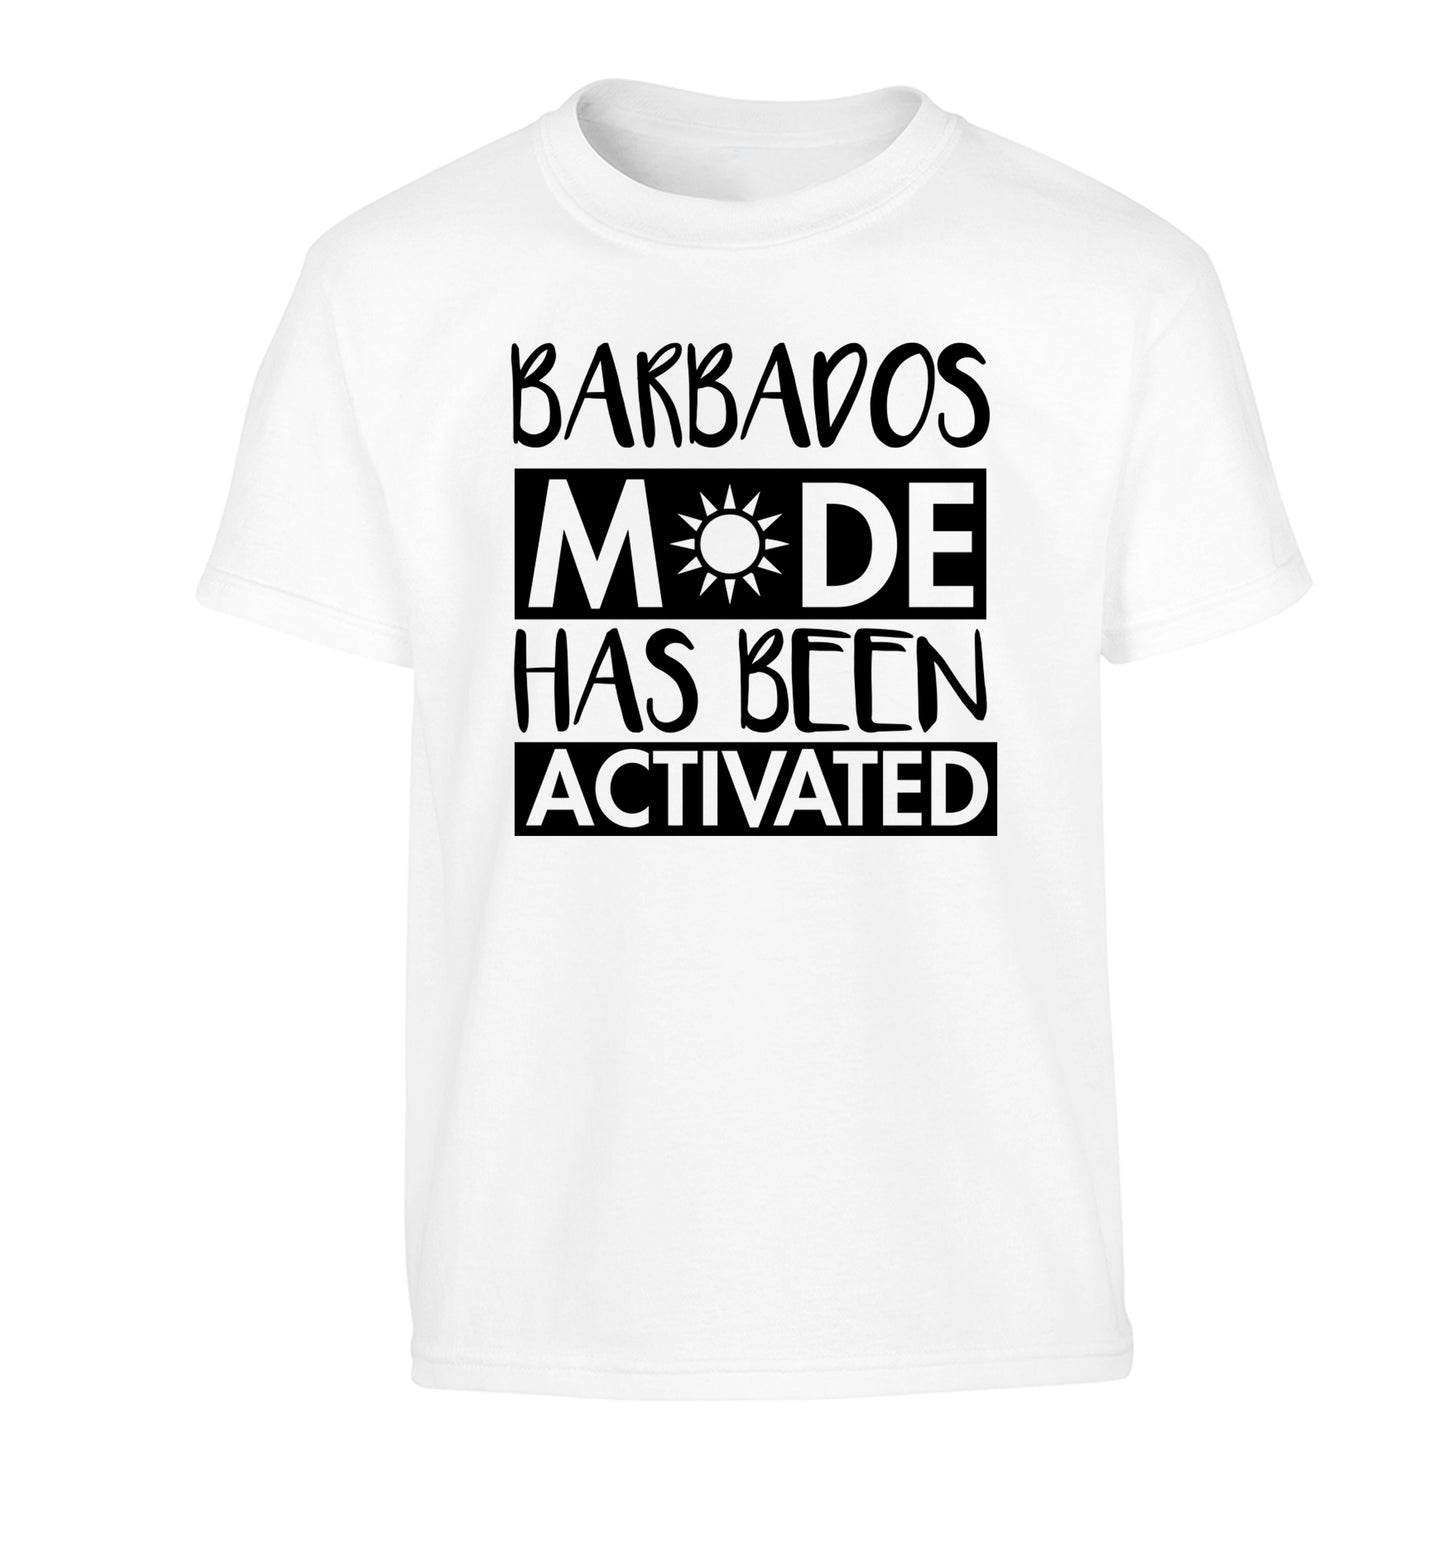 Barbados mode has been activated Children's white Tshirt 12-13 Years